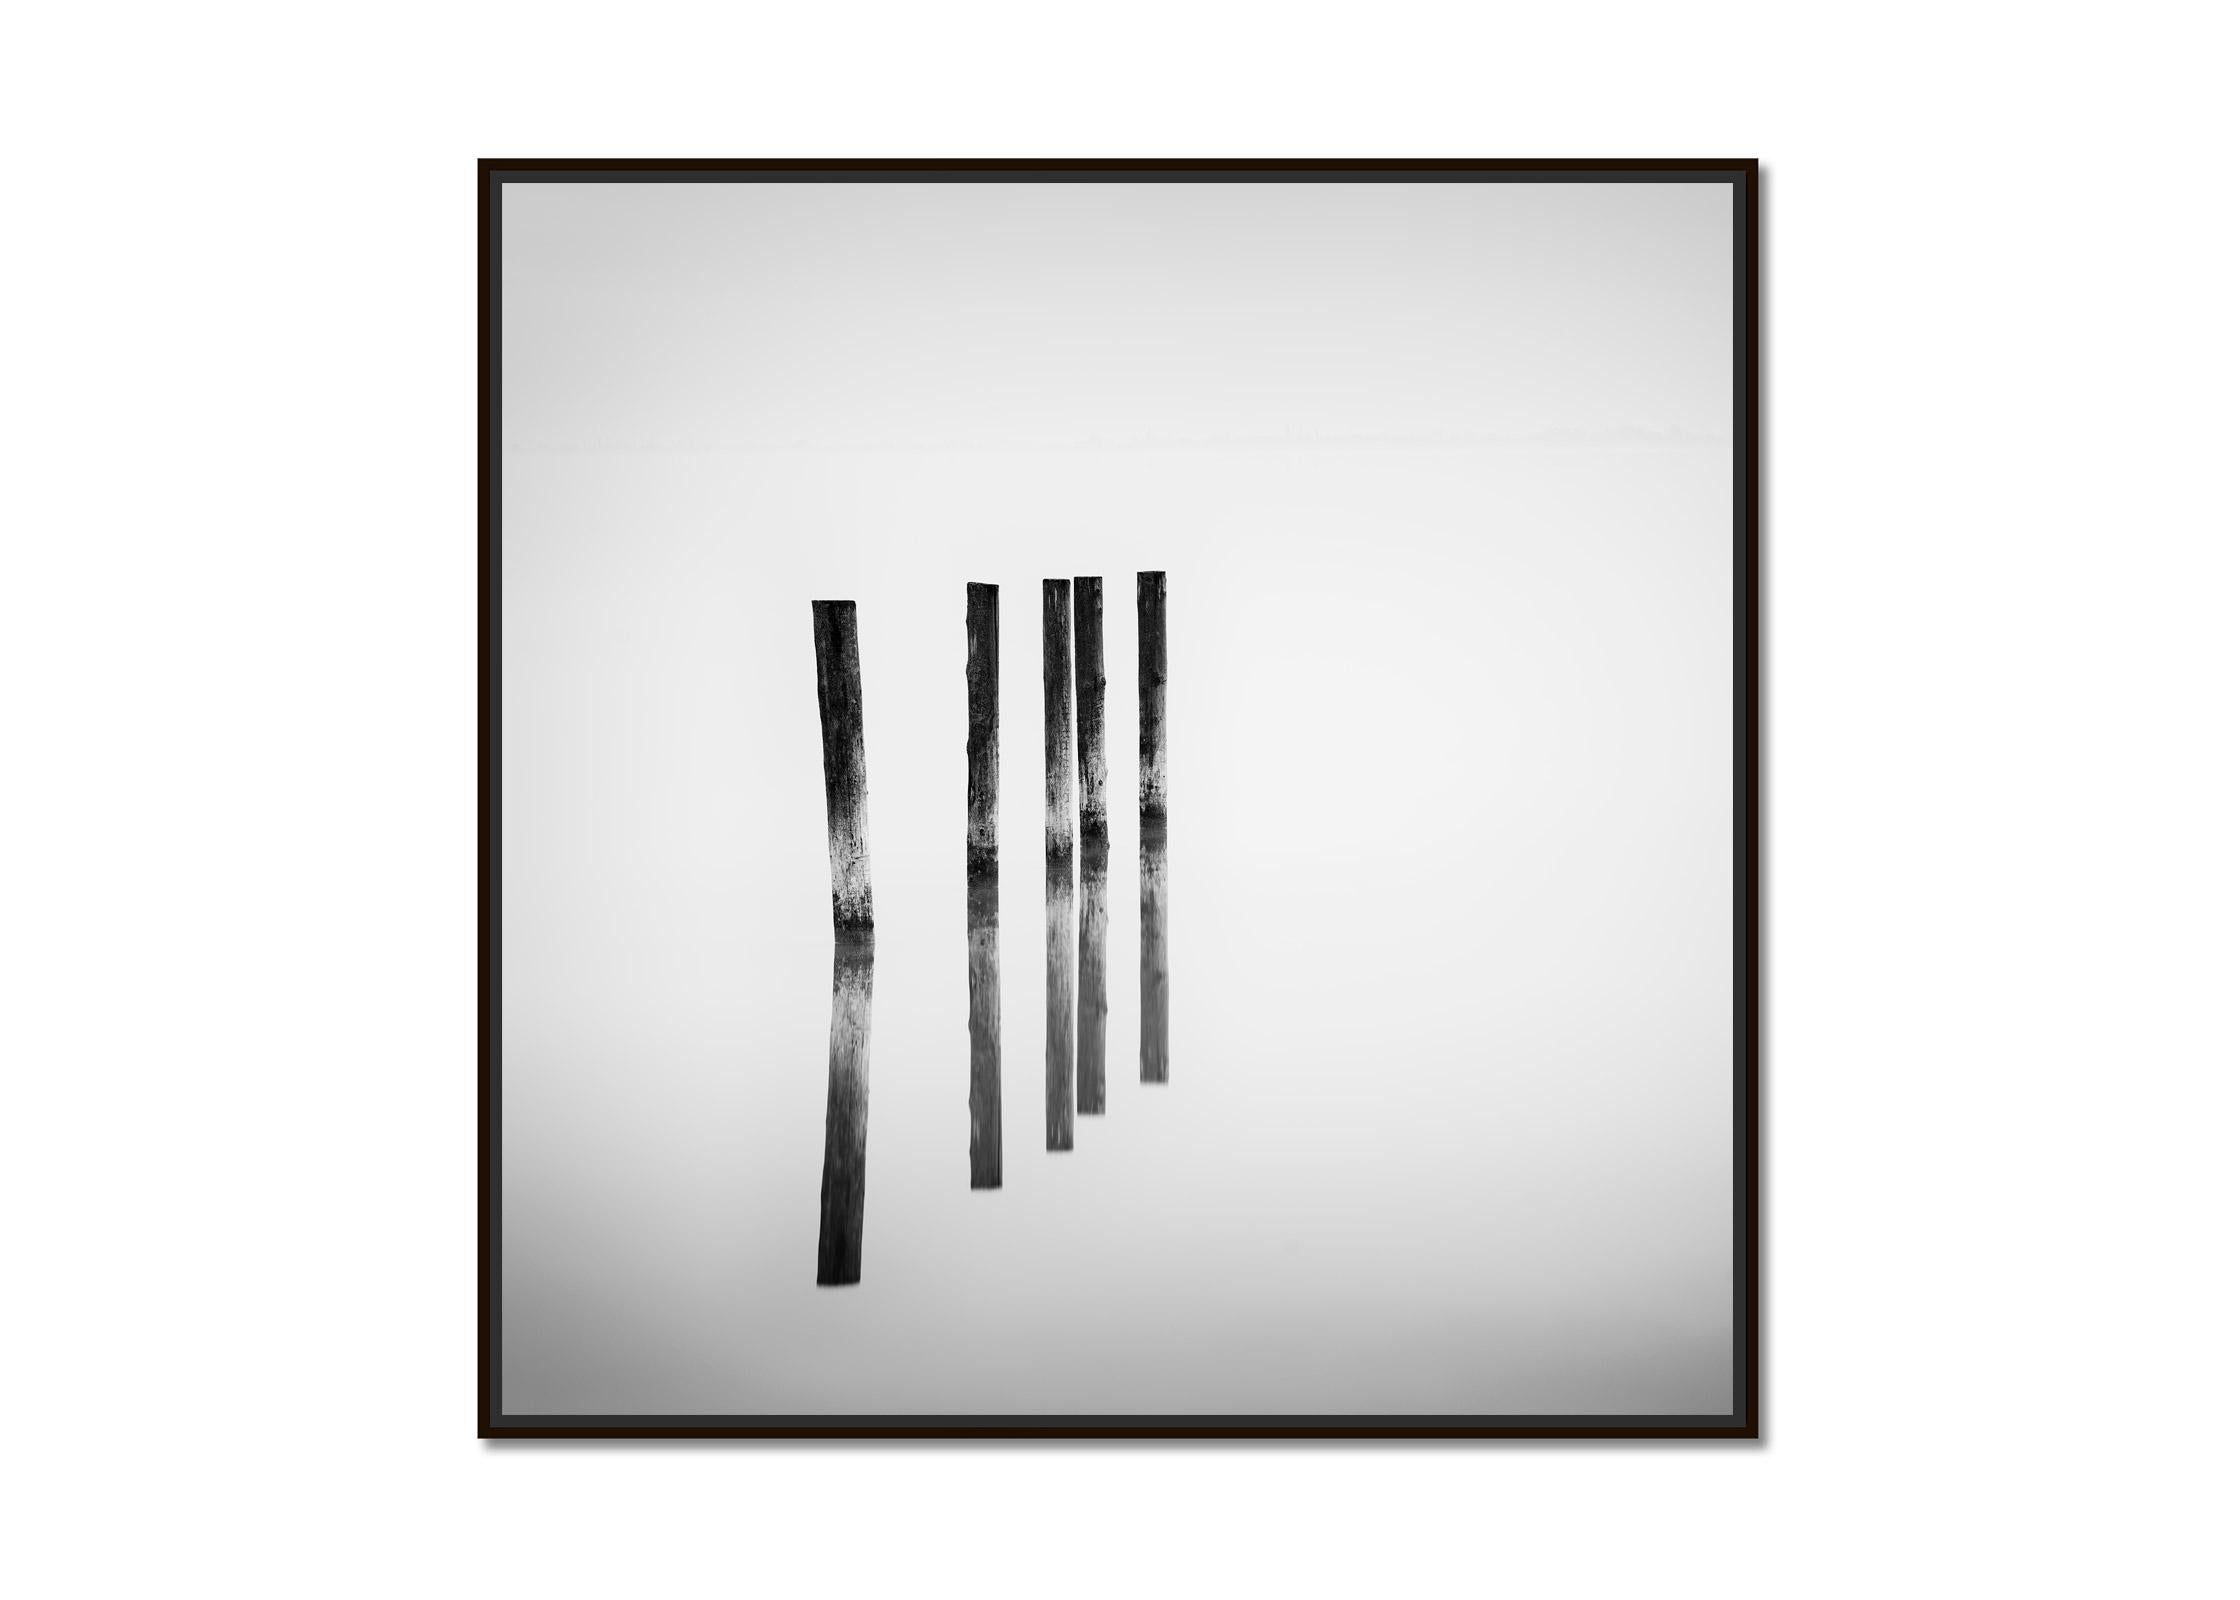 Five wooden Posts in the Lake, black and white, long exposure fineart waterscape - Photograph by Gerald Berghammer